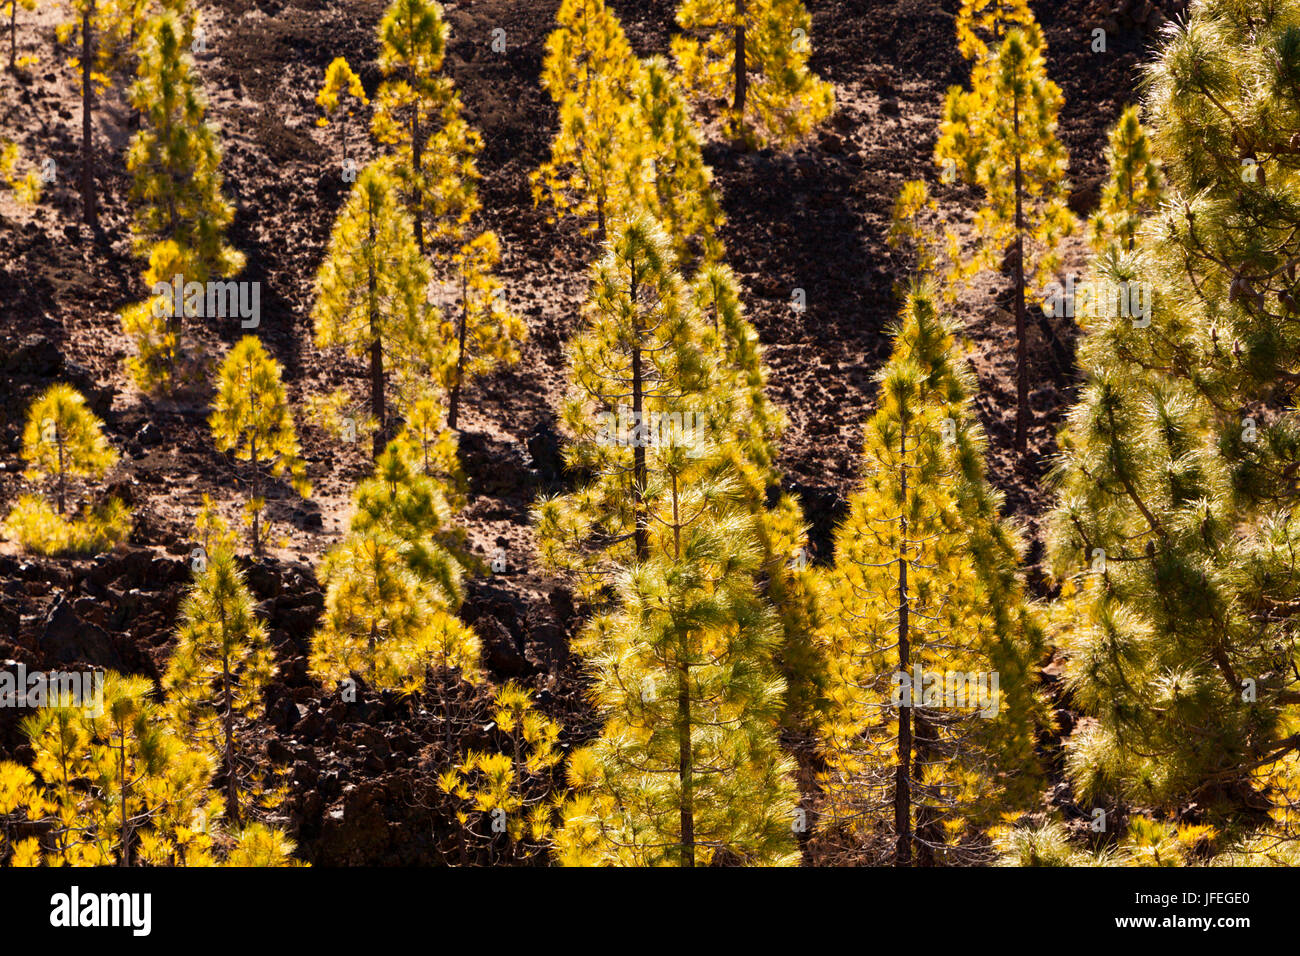 To Canaries pines in the Teide national park, Pinus canariensis, Tenerife, Spain Stock Photo